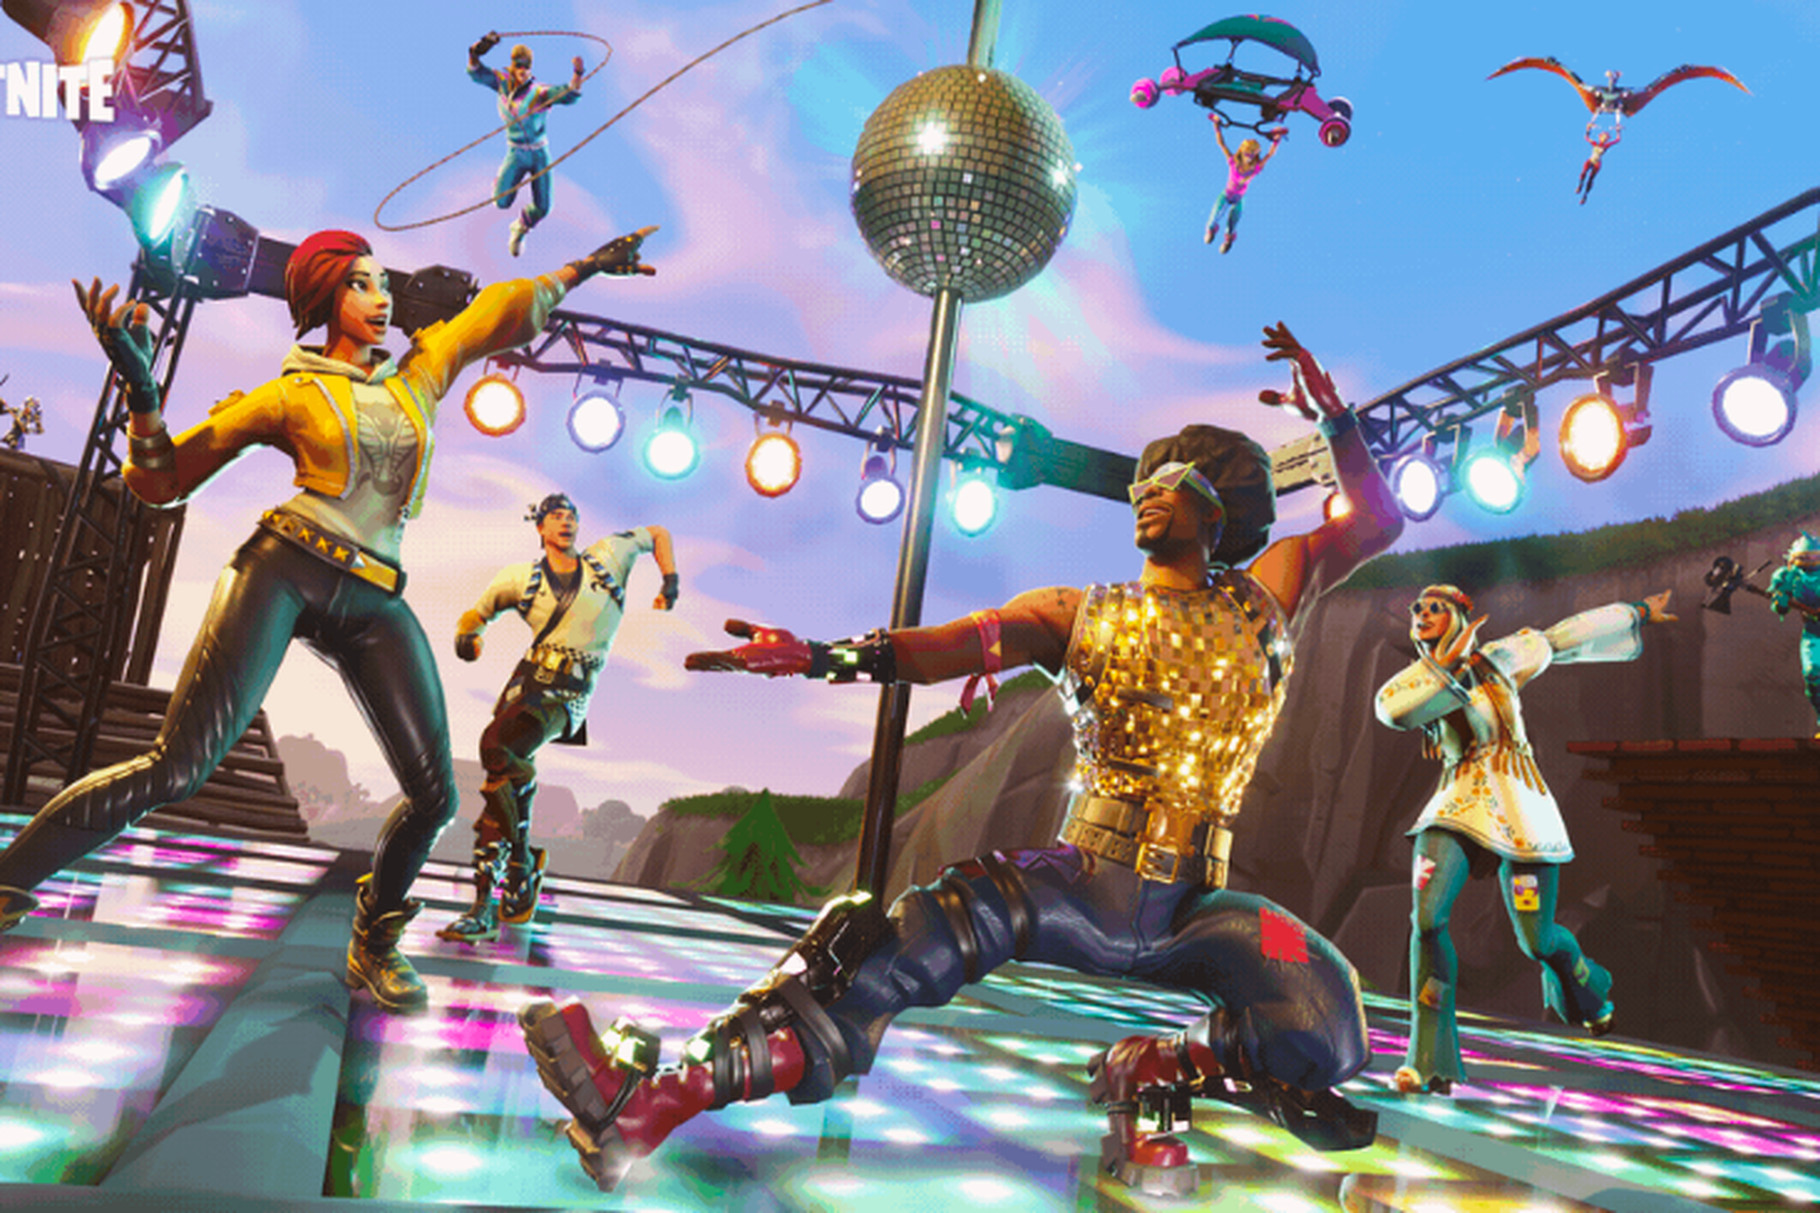 Fortnite’s new mode makes you dance (and kill) to win FRPLive